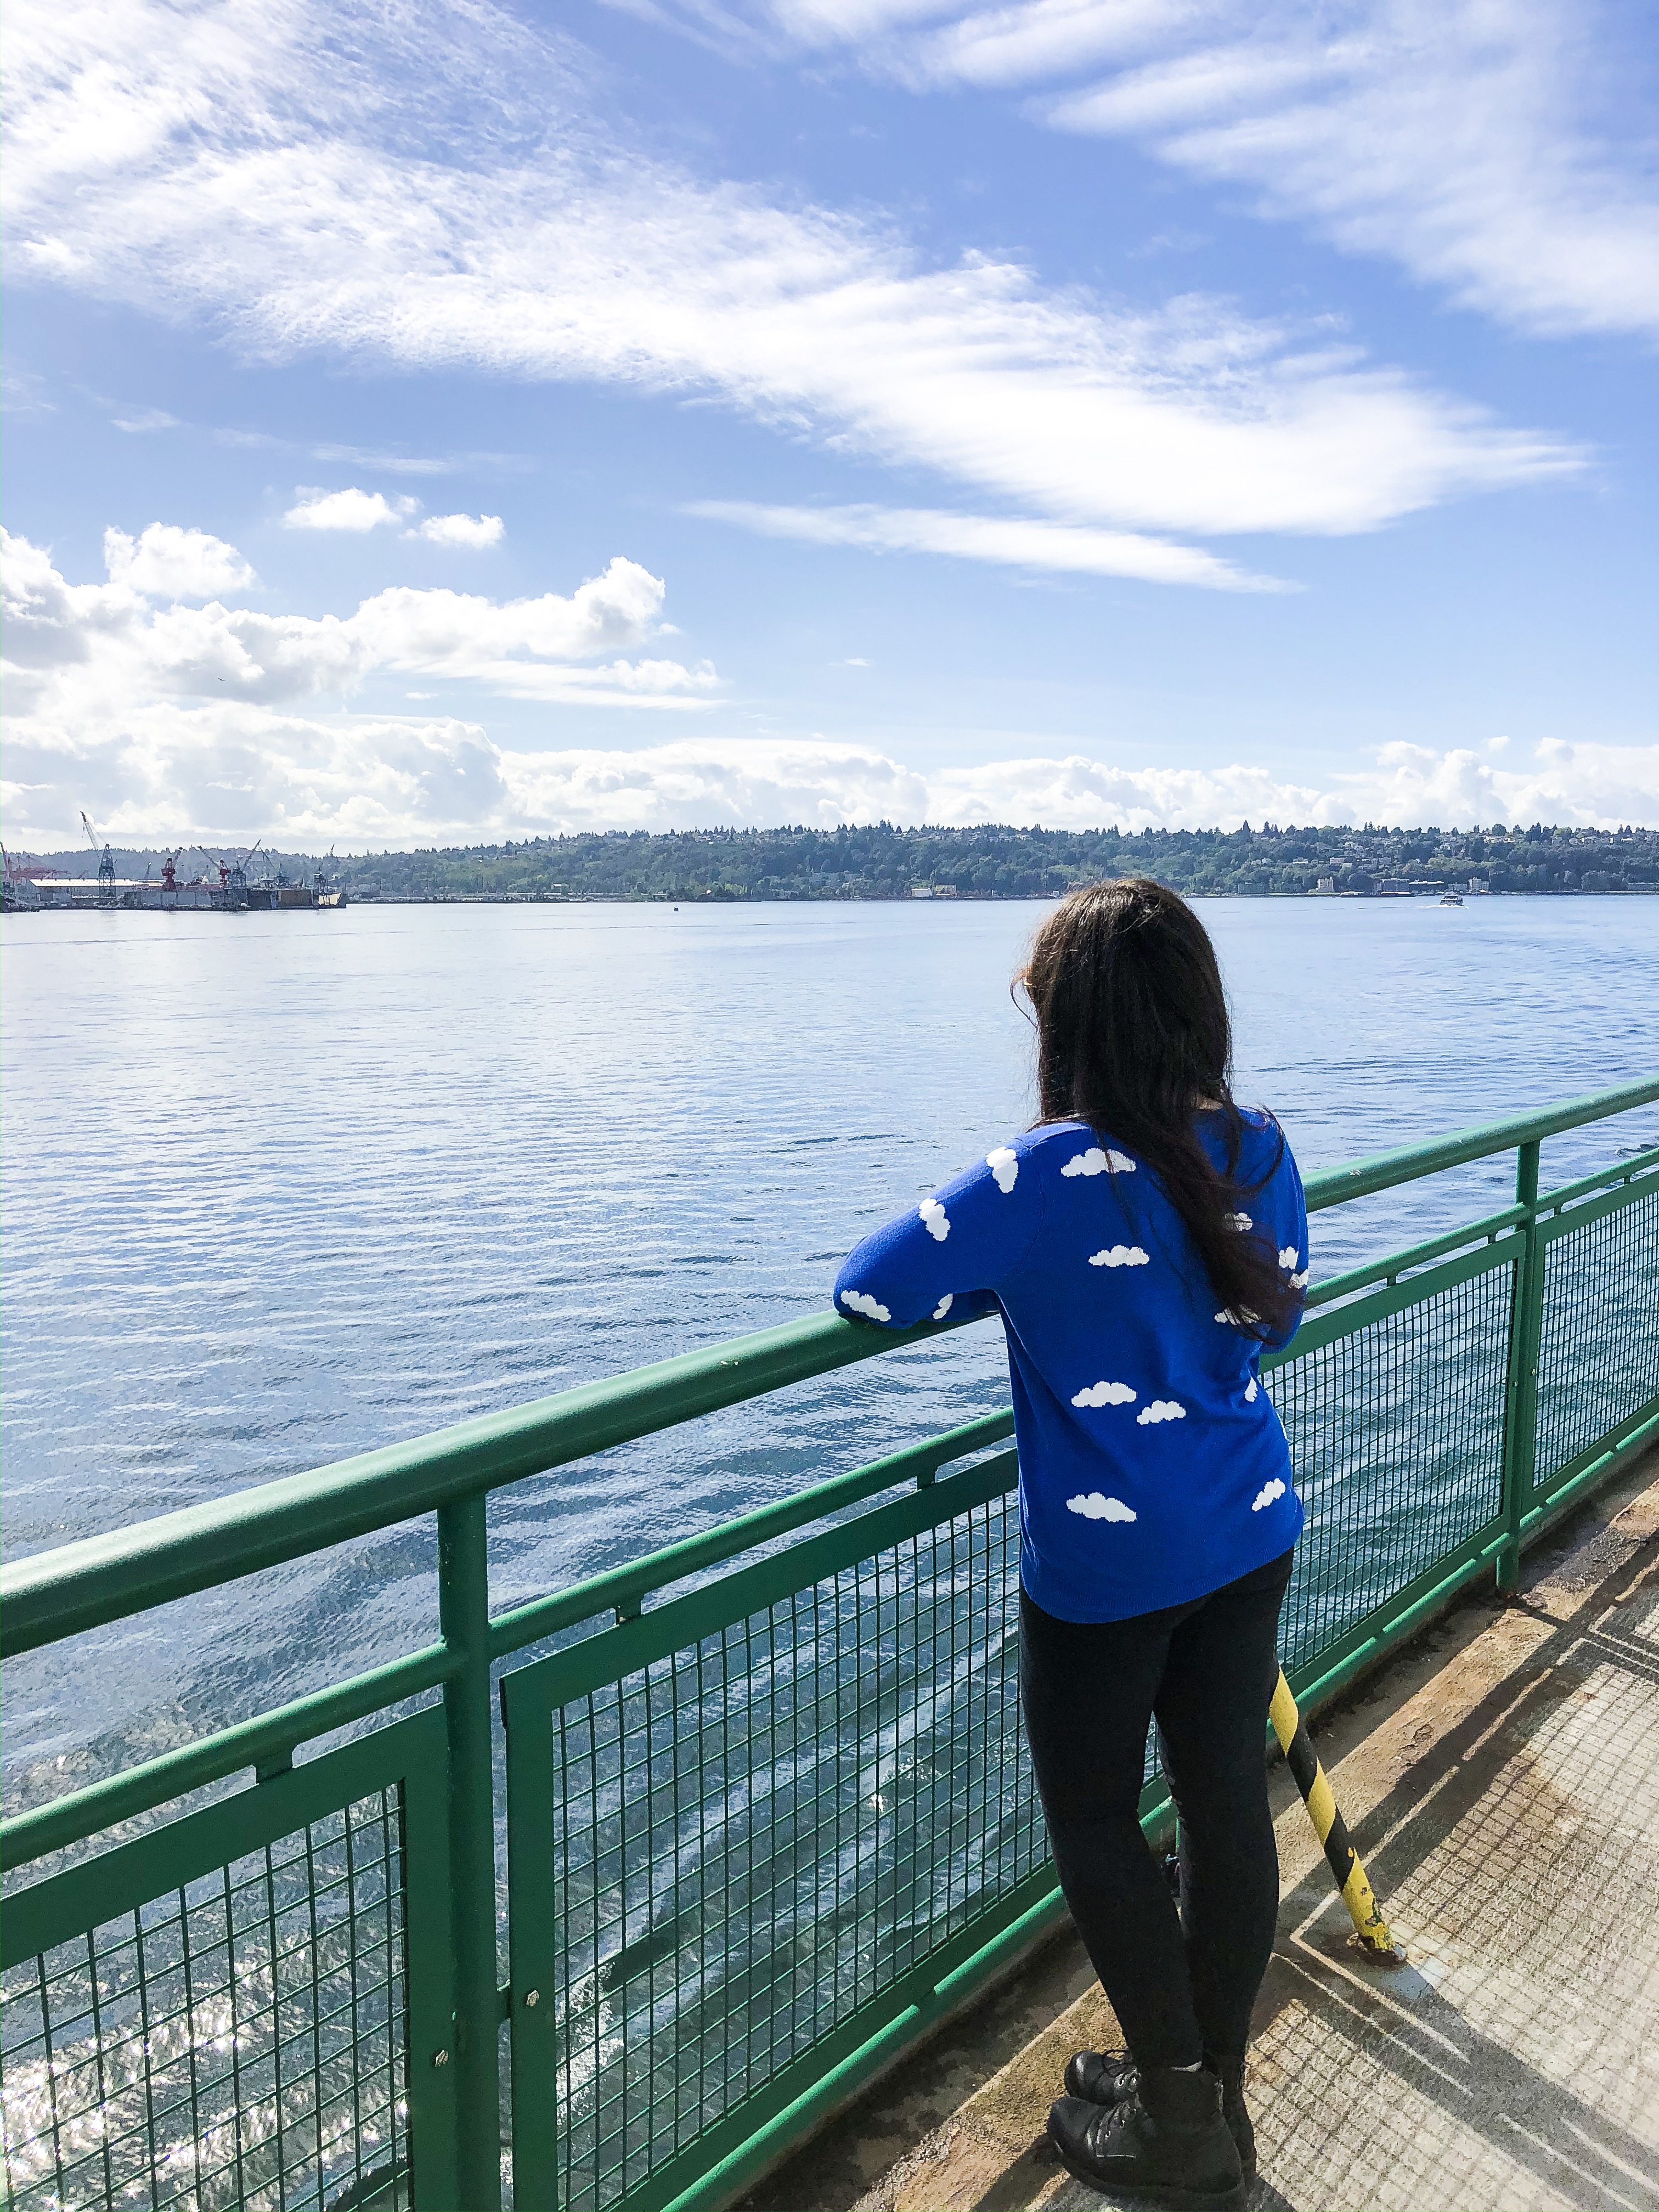 Seattle Travel Guide - Where to go, what to eat, and places to skip // Guide for a Couple's Trip to Seattle - ew & pt